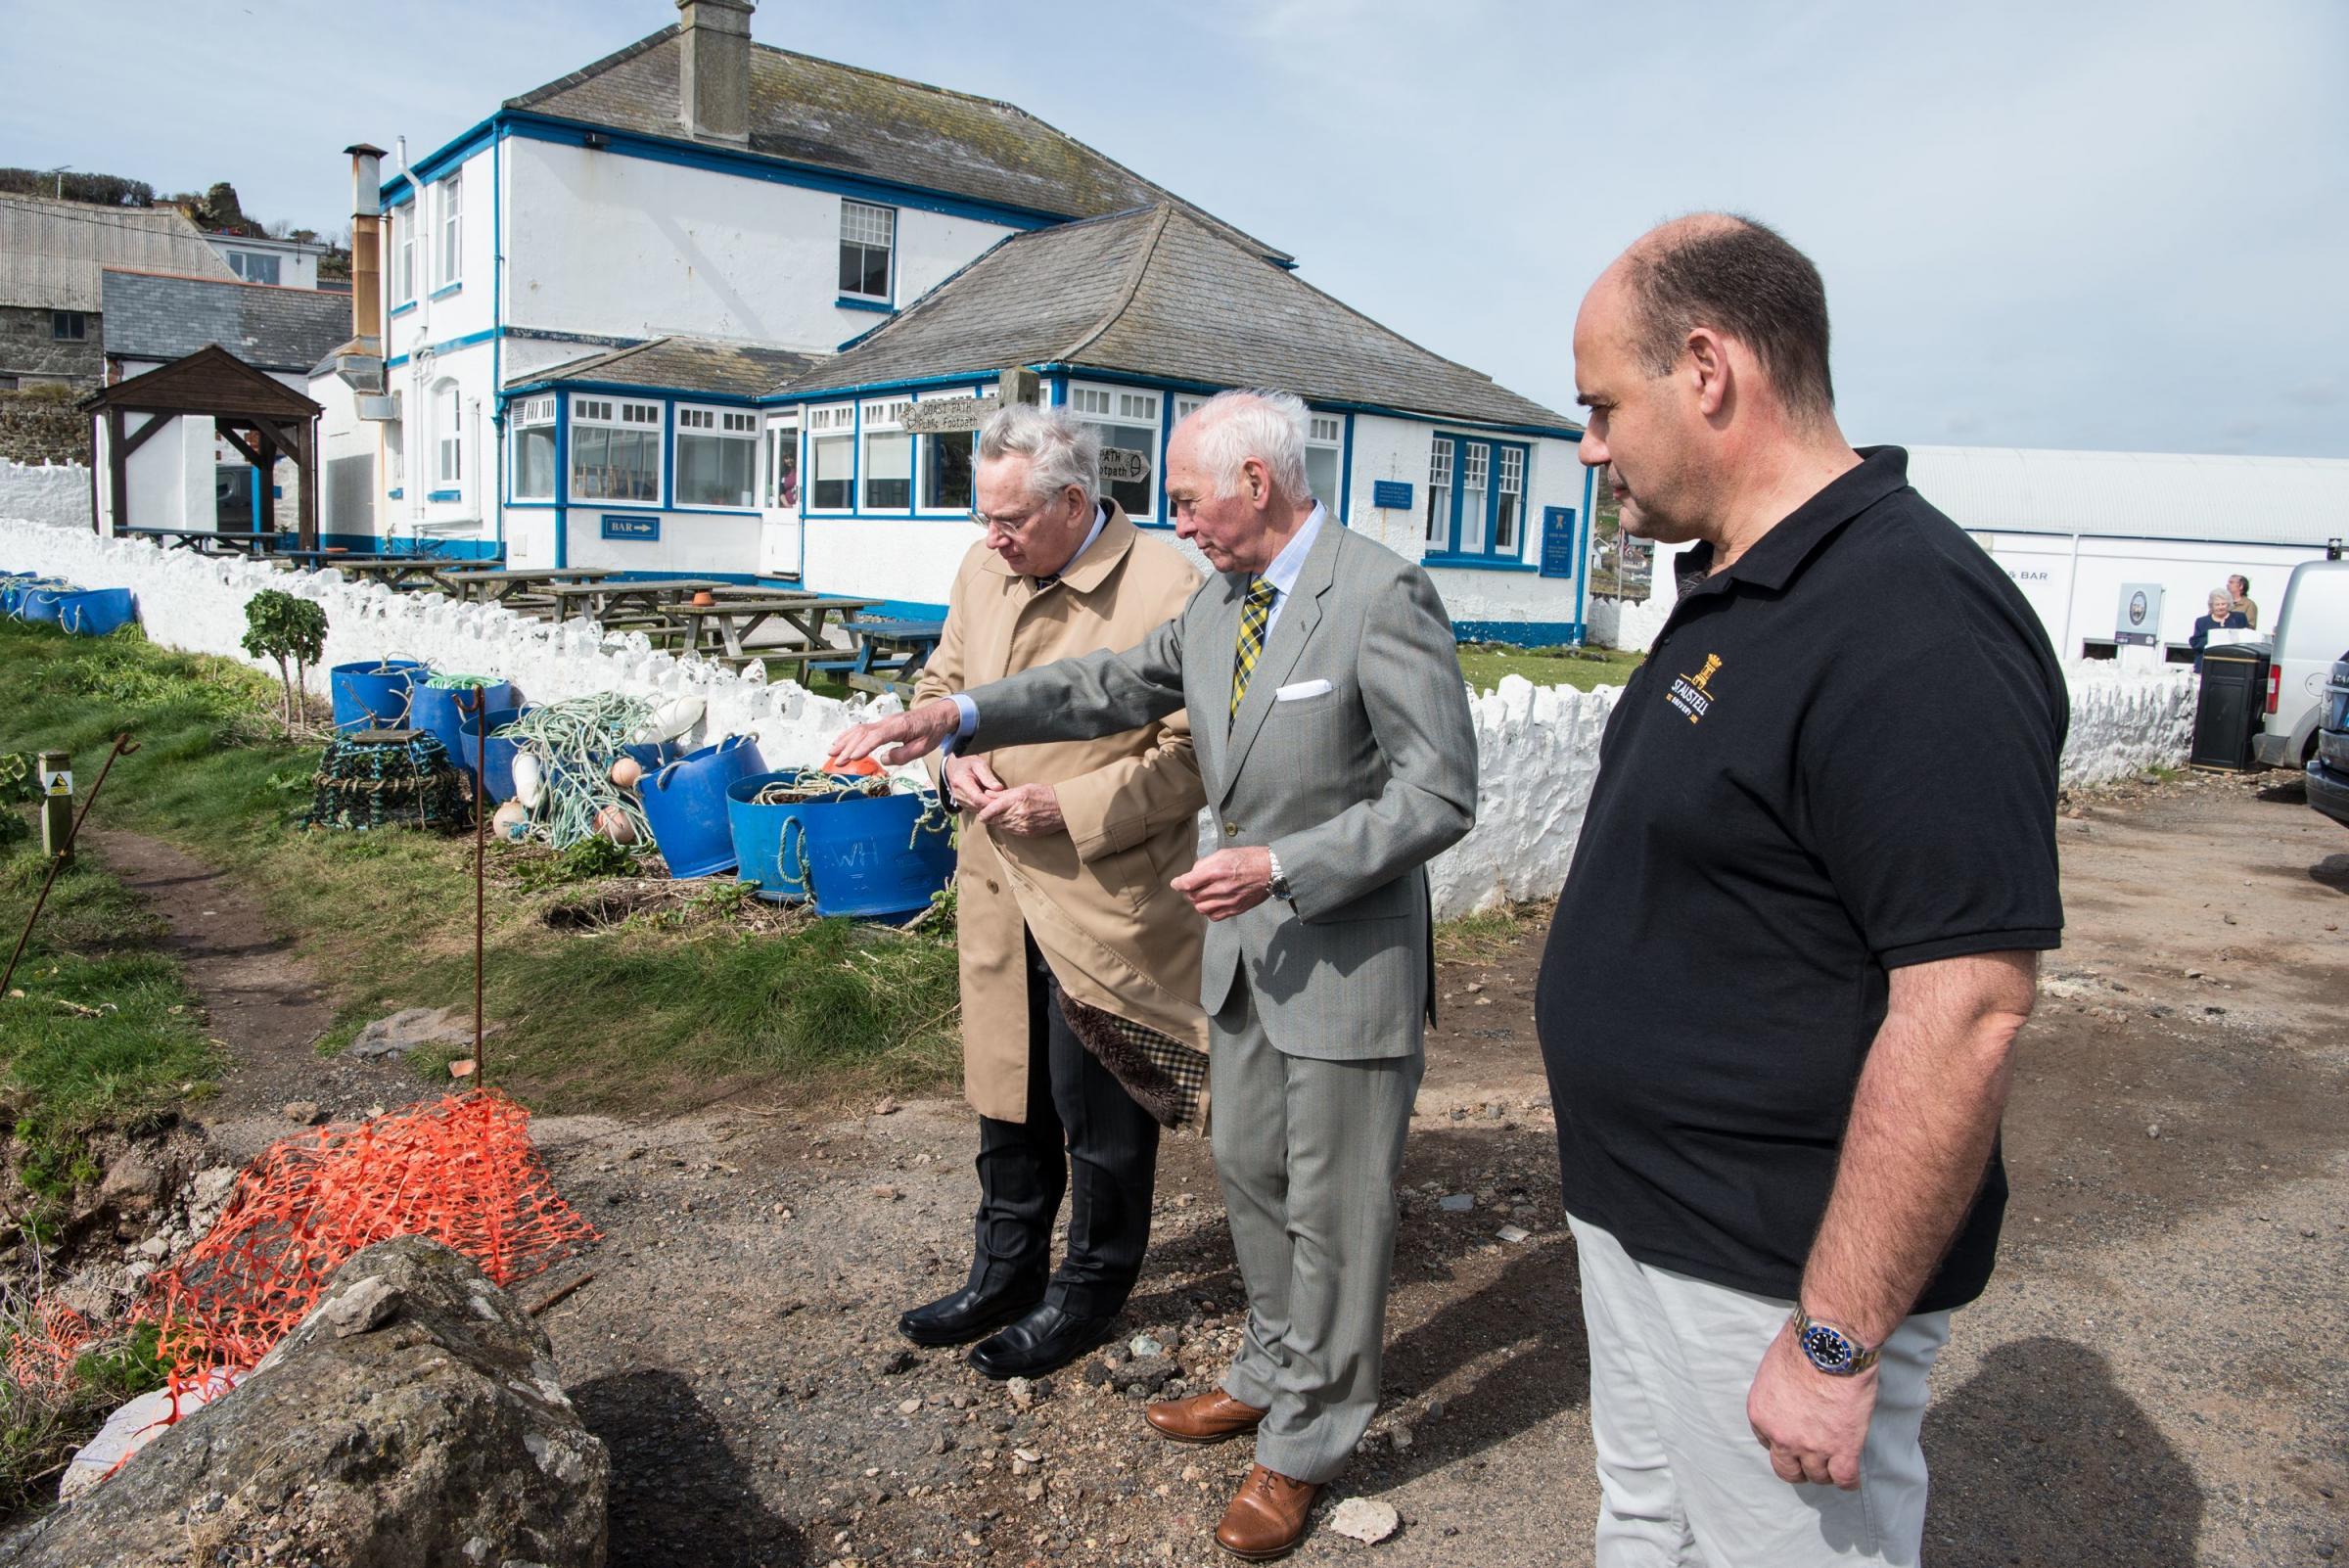 n Bill Frisken of St Keverne Parish Council shows the Duke of Gloucester the damage to the sea wall, watched by Ian, a year after the 2017 flash flood